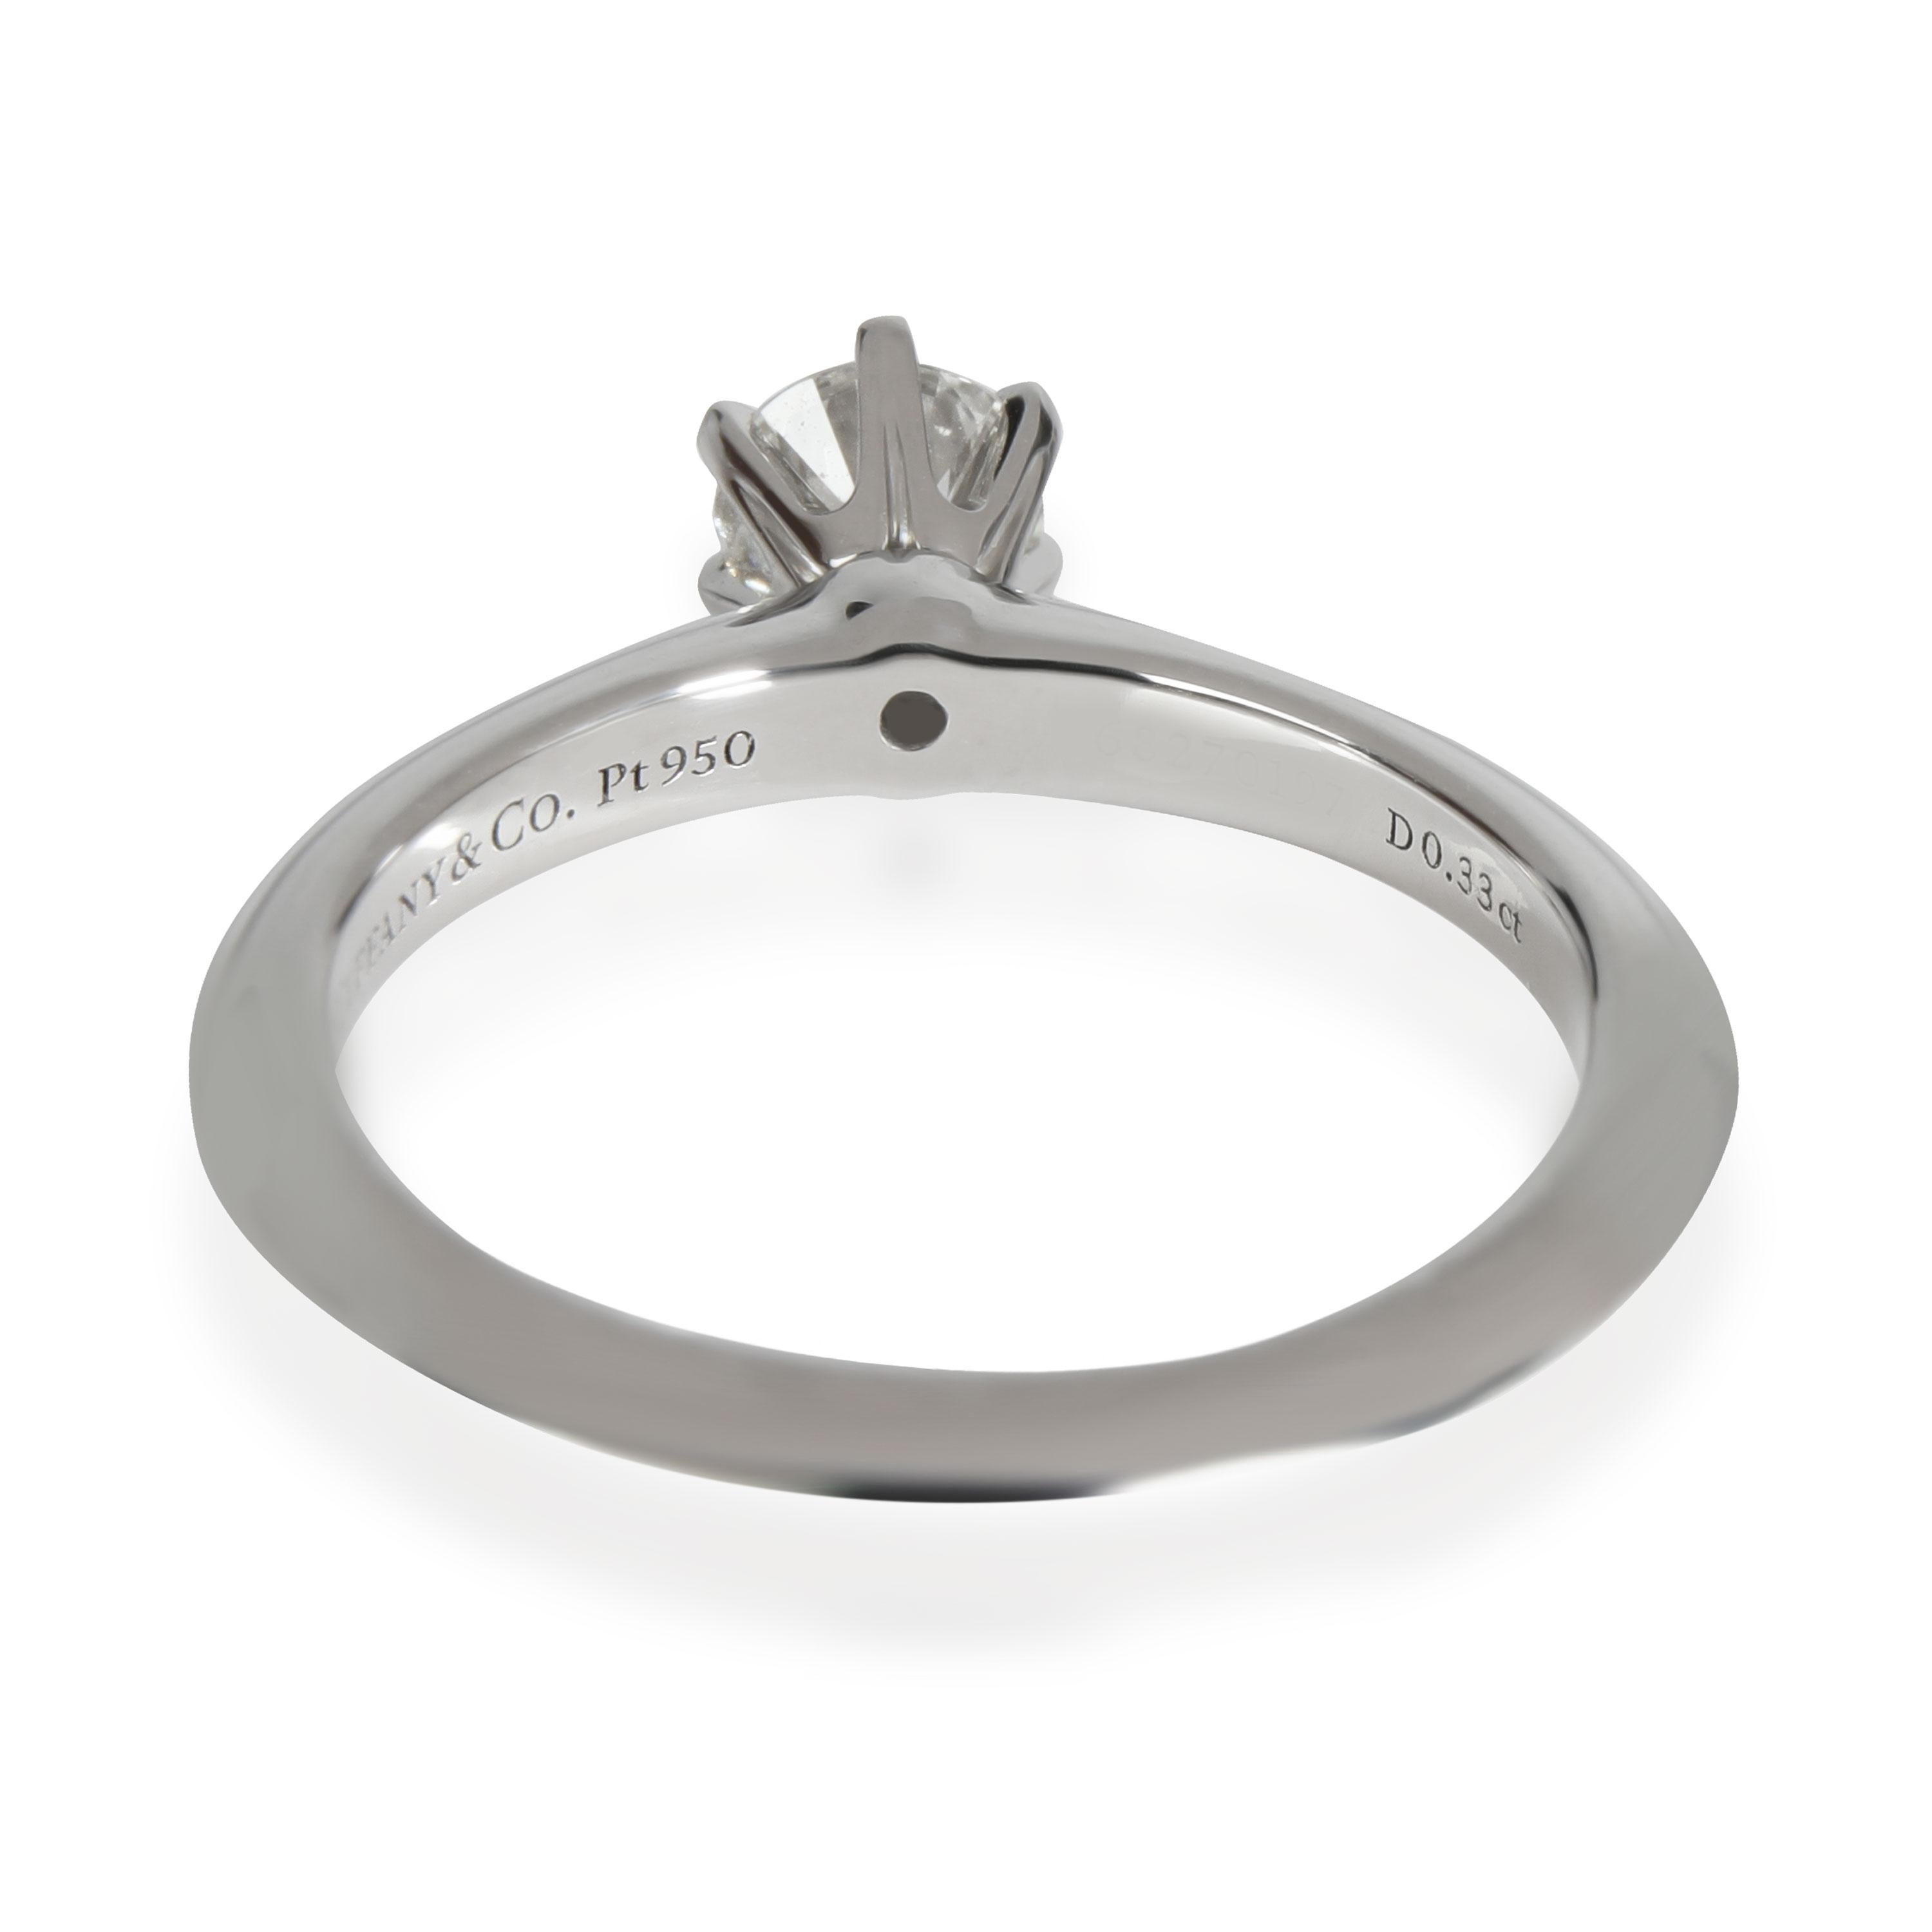 Tiffany & Co. Diamond Engagement Ring in Platinum Platinum I VS1 0.33 CTW

PRIMARY DETAILS
SKU: 112089
Listing Title: Tiffany & Co. Diamond Engagement Ring in Platinum Platinum I VS1 0.33 CTW
Condition Description: Retails for 2830 USD. In excellent